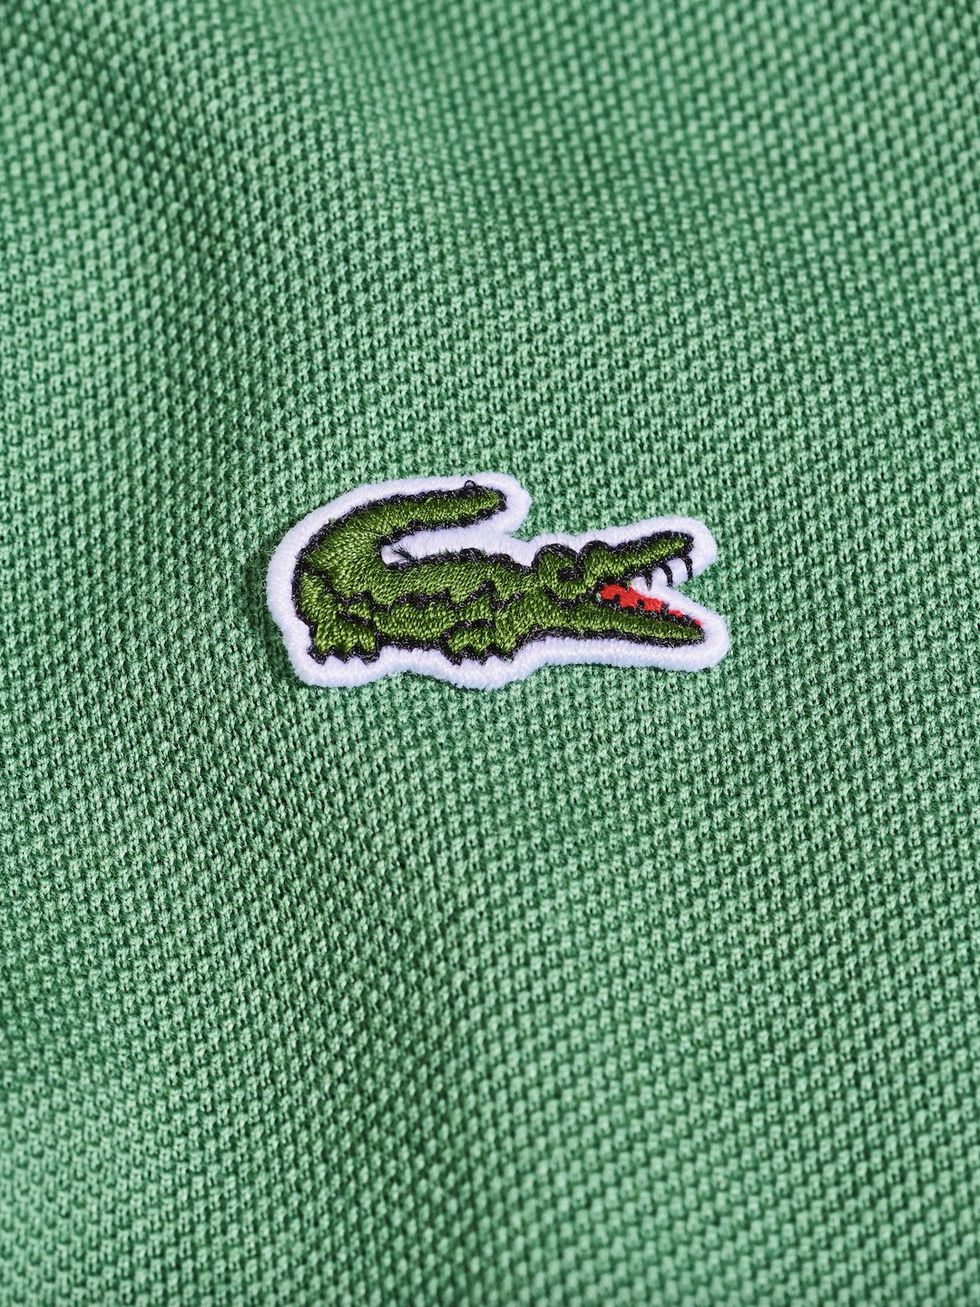 Lacoste Classic Short Sleeve Pique Polo Shirt Review